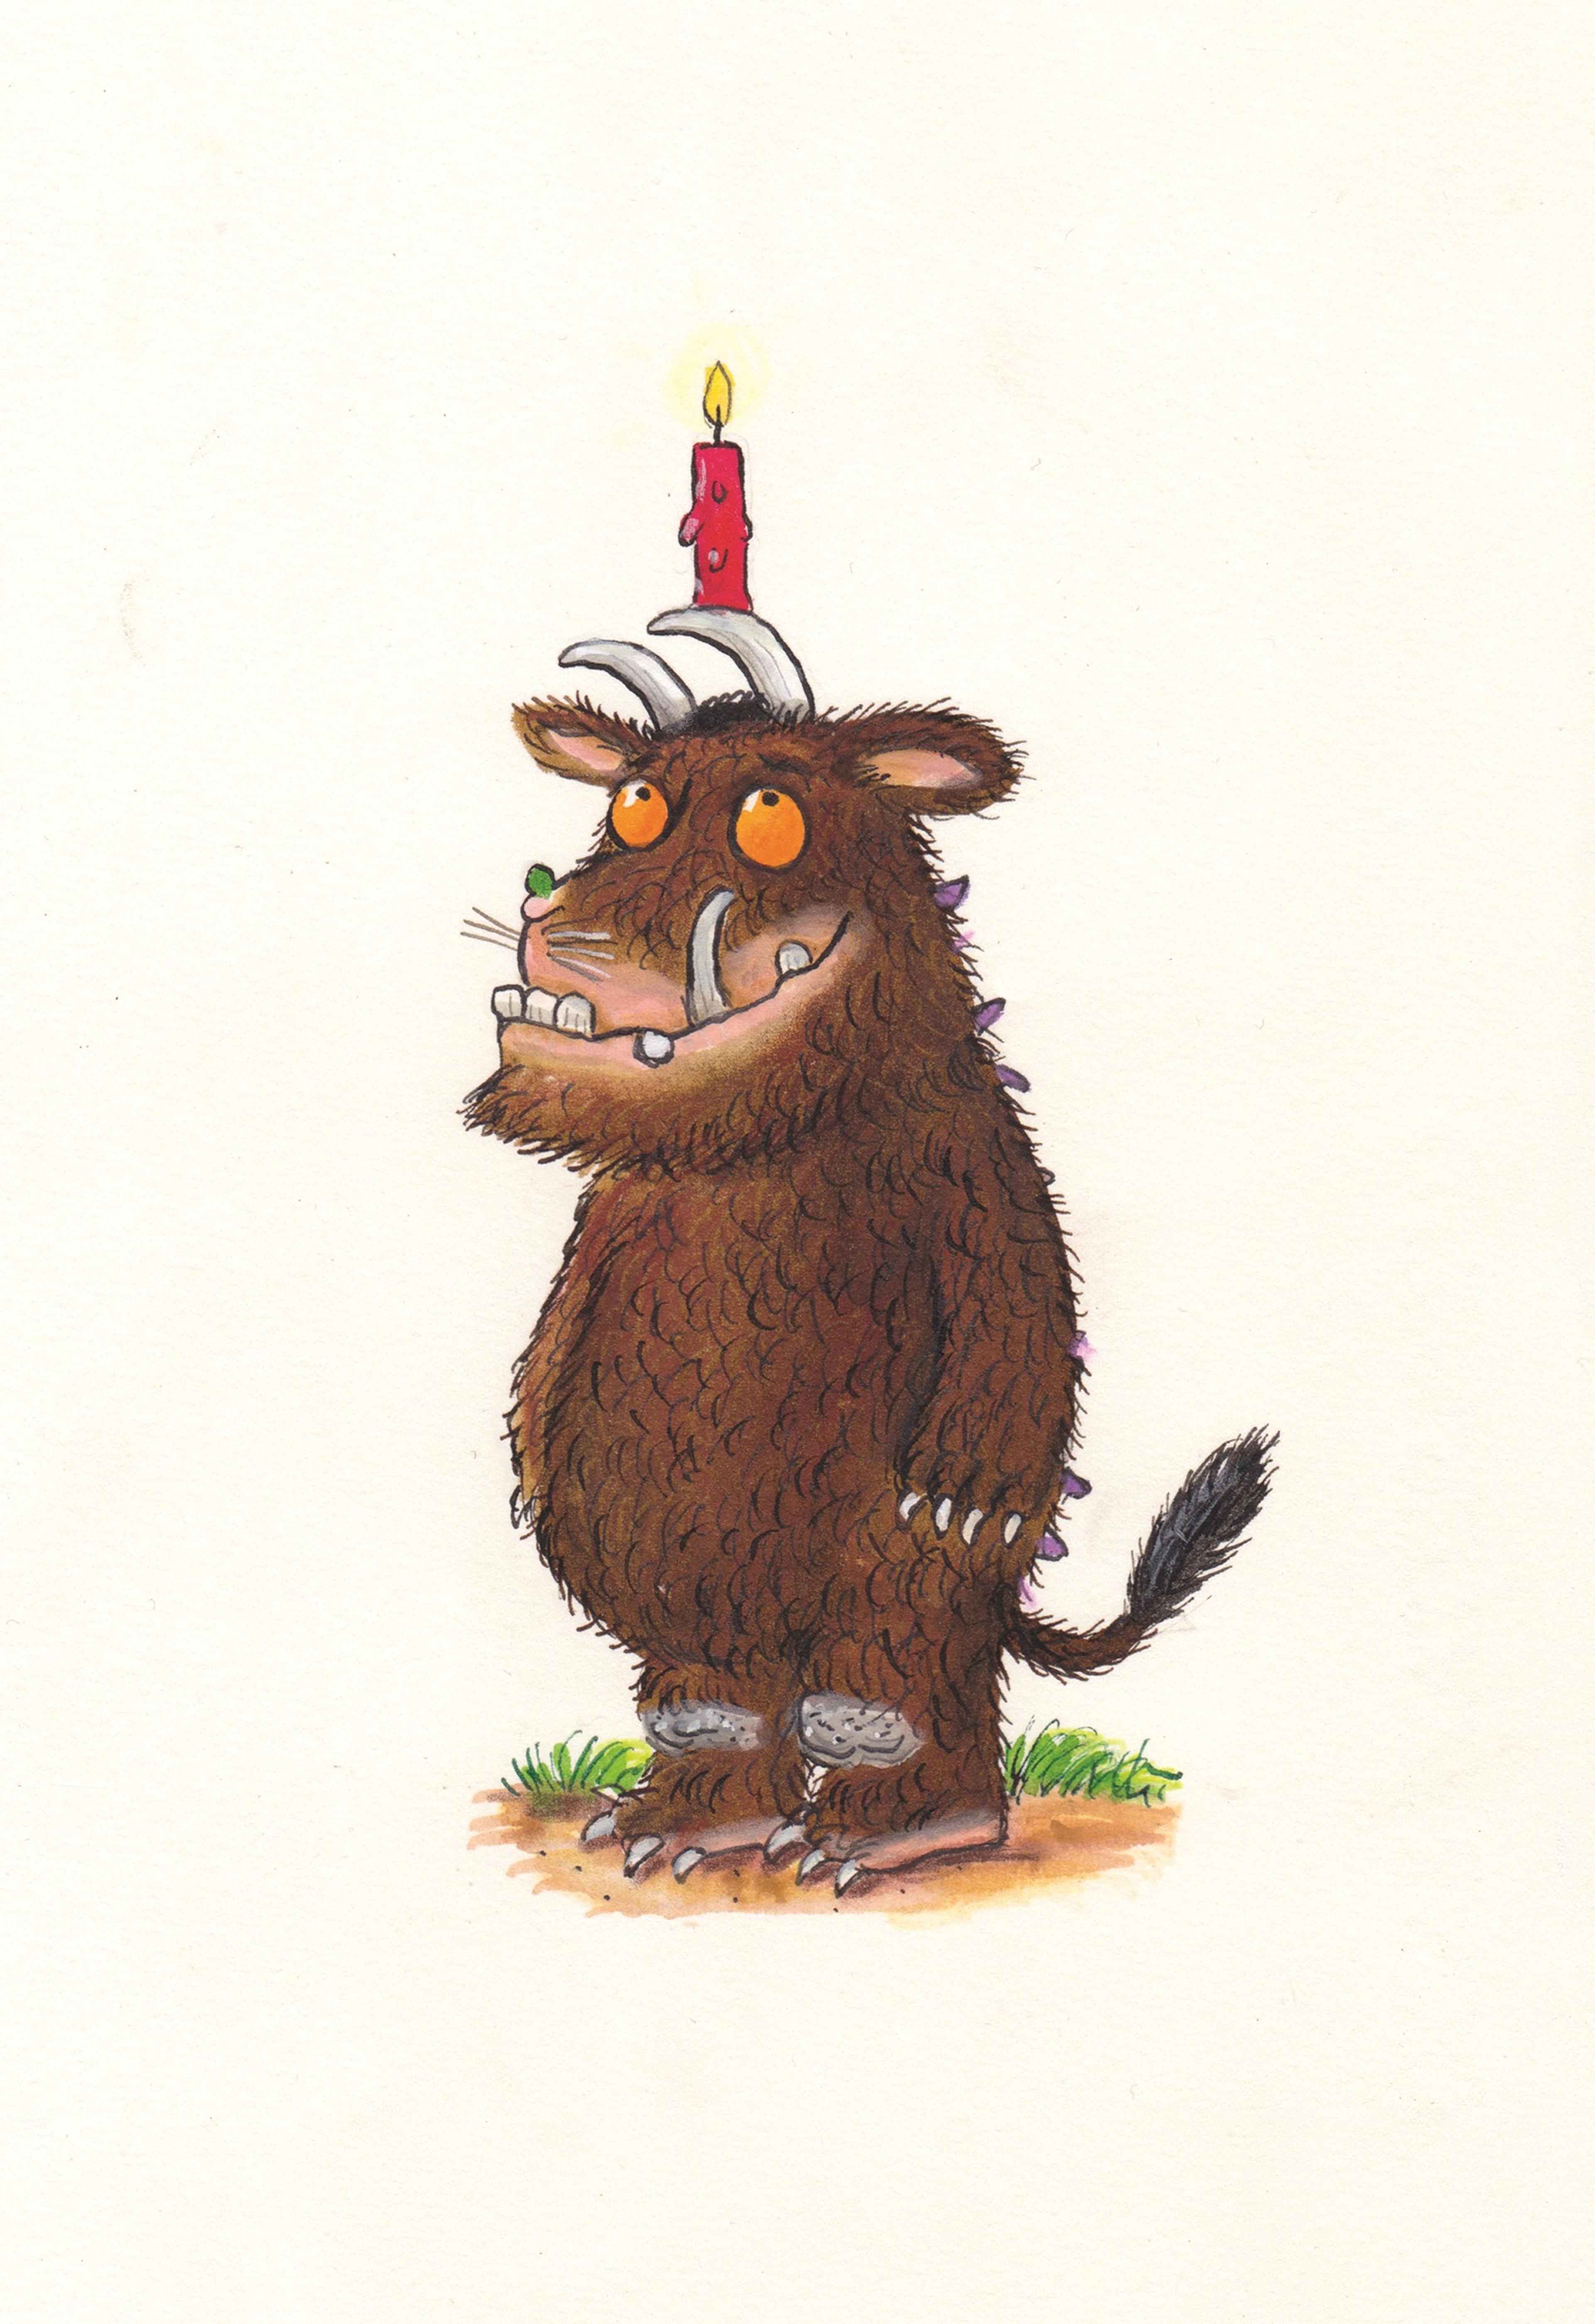 Illustration of the Gruffalo with a red candle on his head